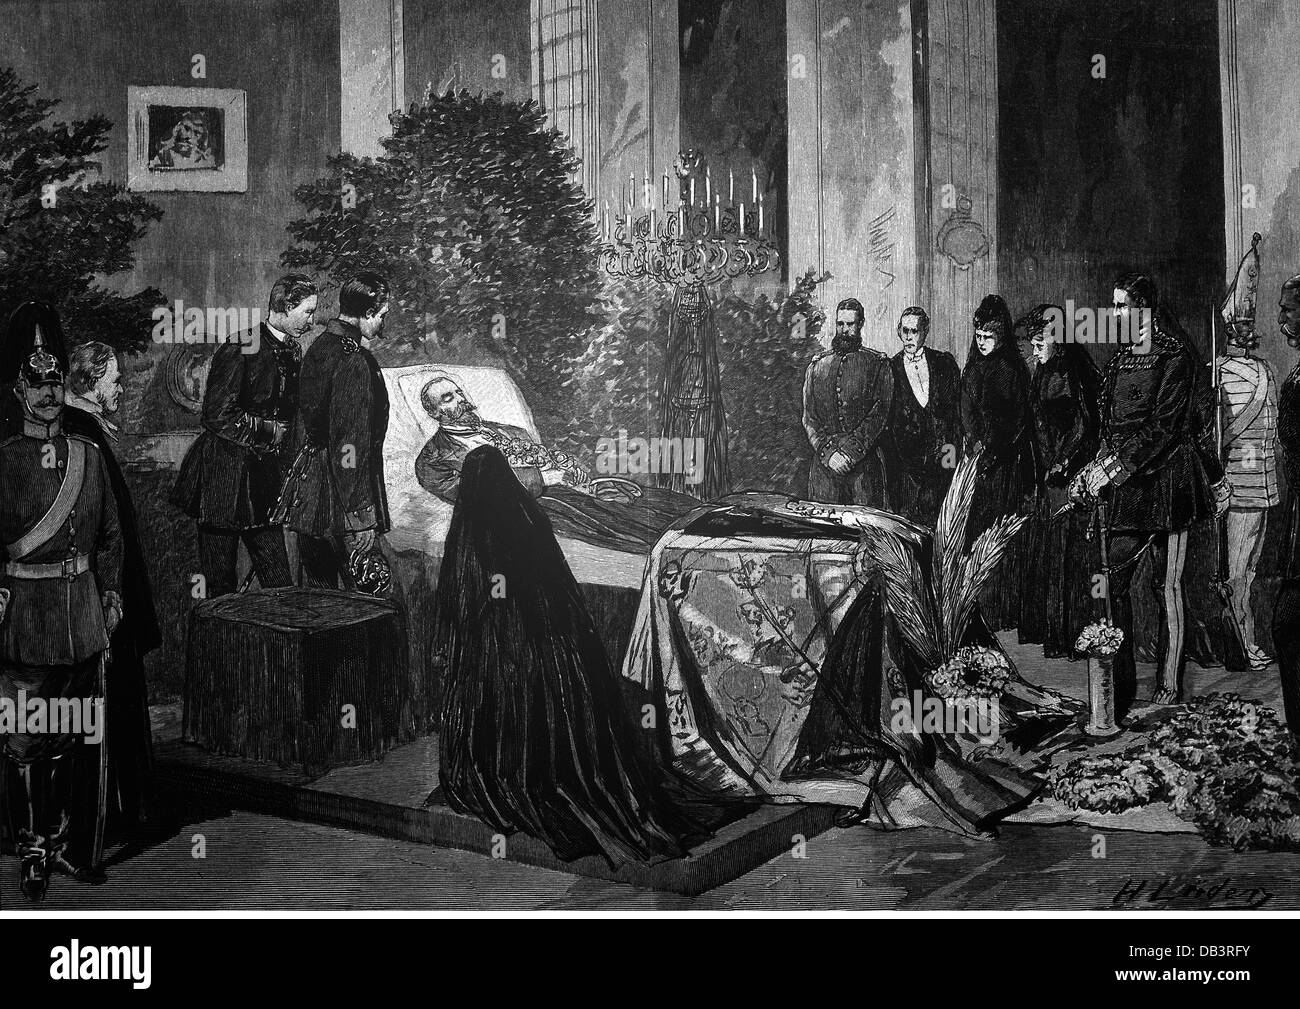 Friedrich III, 18.10.1831 - 15.6.1888, German Emperor 9.3.1888 - 15.6.1888, death, lay out in of the Jasper Gallery, castle Friedrichkron, 16.6.1888, contemporary wood engraving after drawing by Lueders, Stock Photo